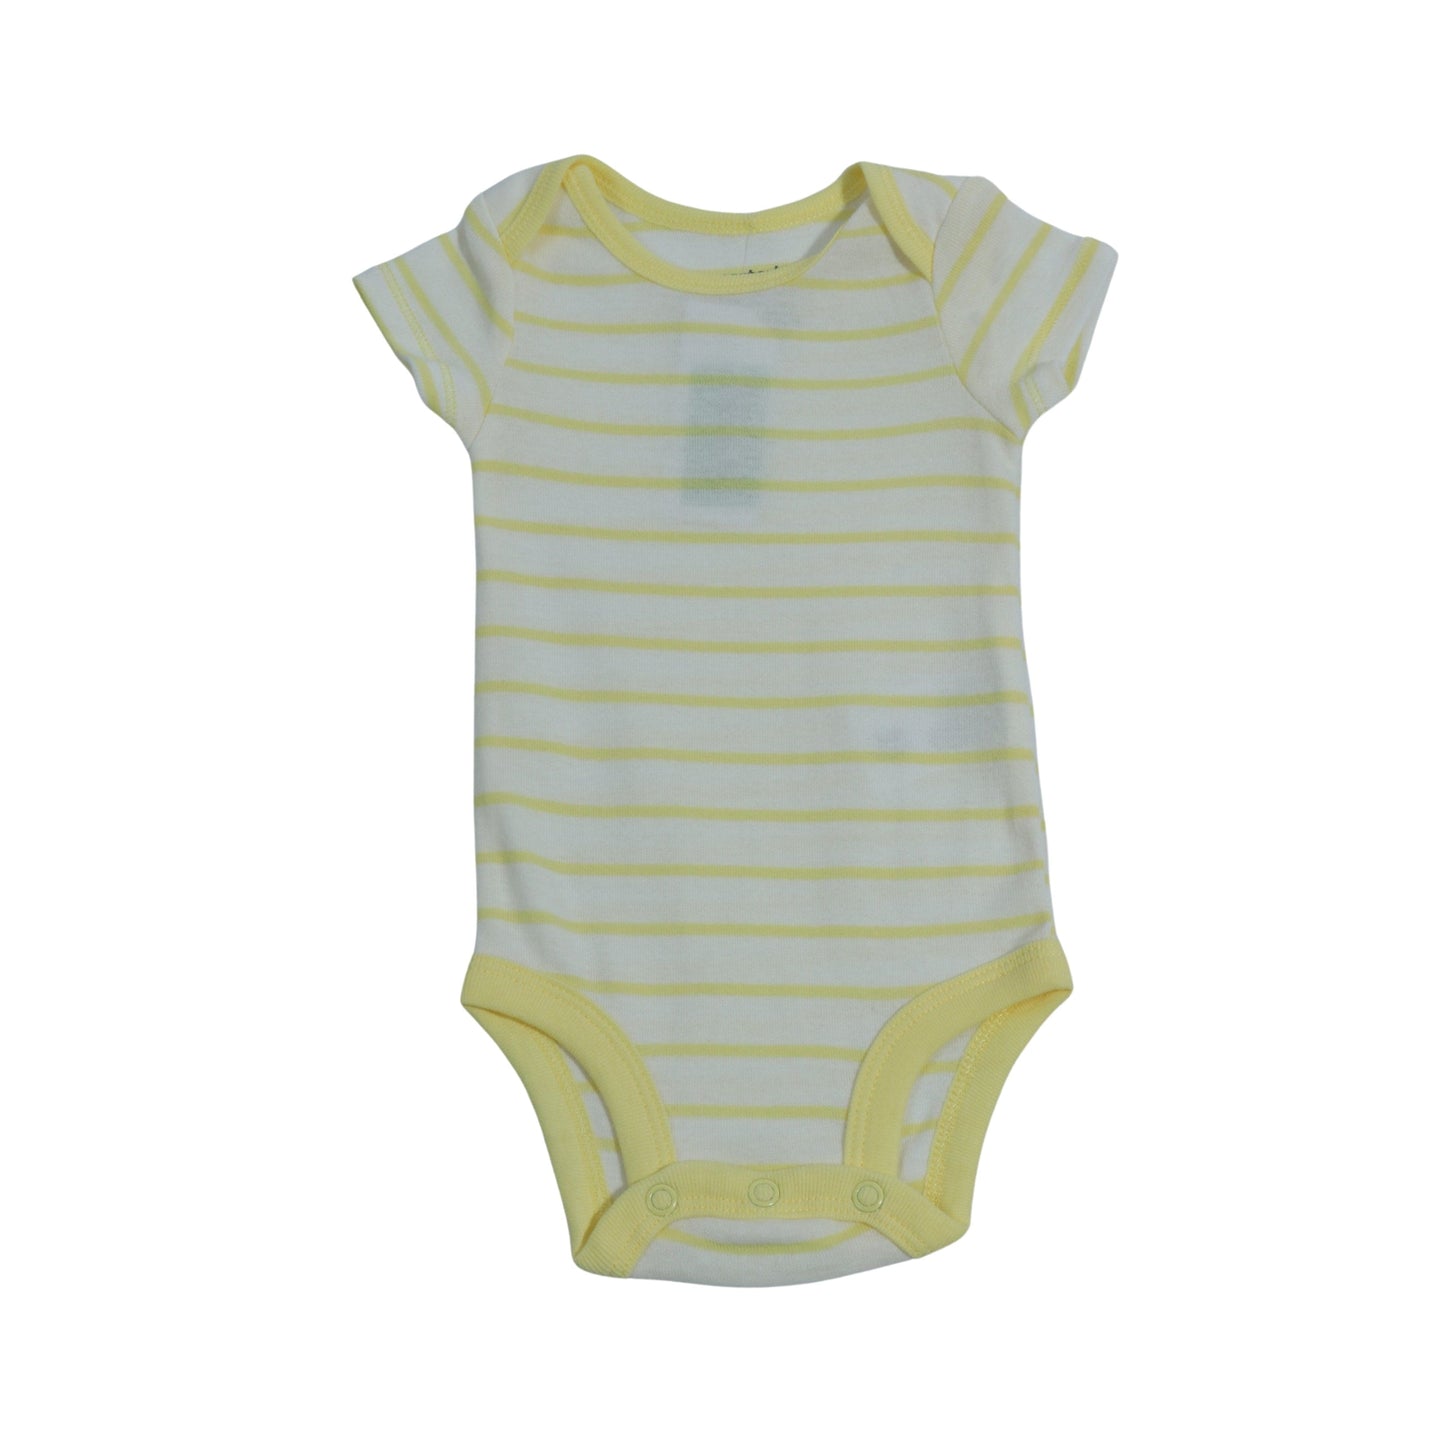 CARTER'S Baby Boy 3 Month / Multi-Color CARTER'S - Baby - All Over Striped Bodysuit